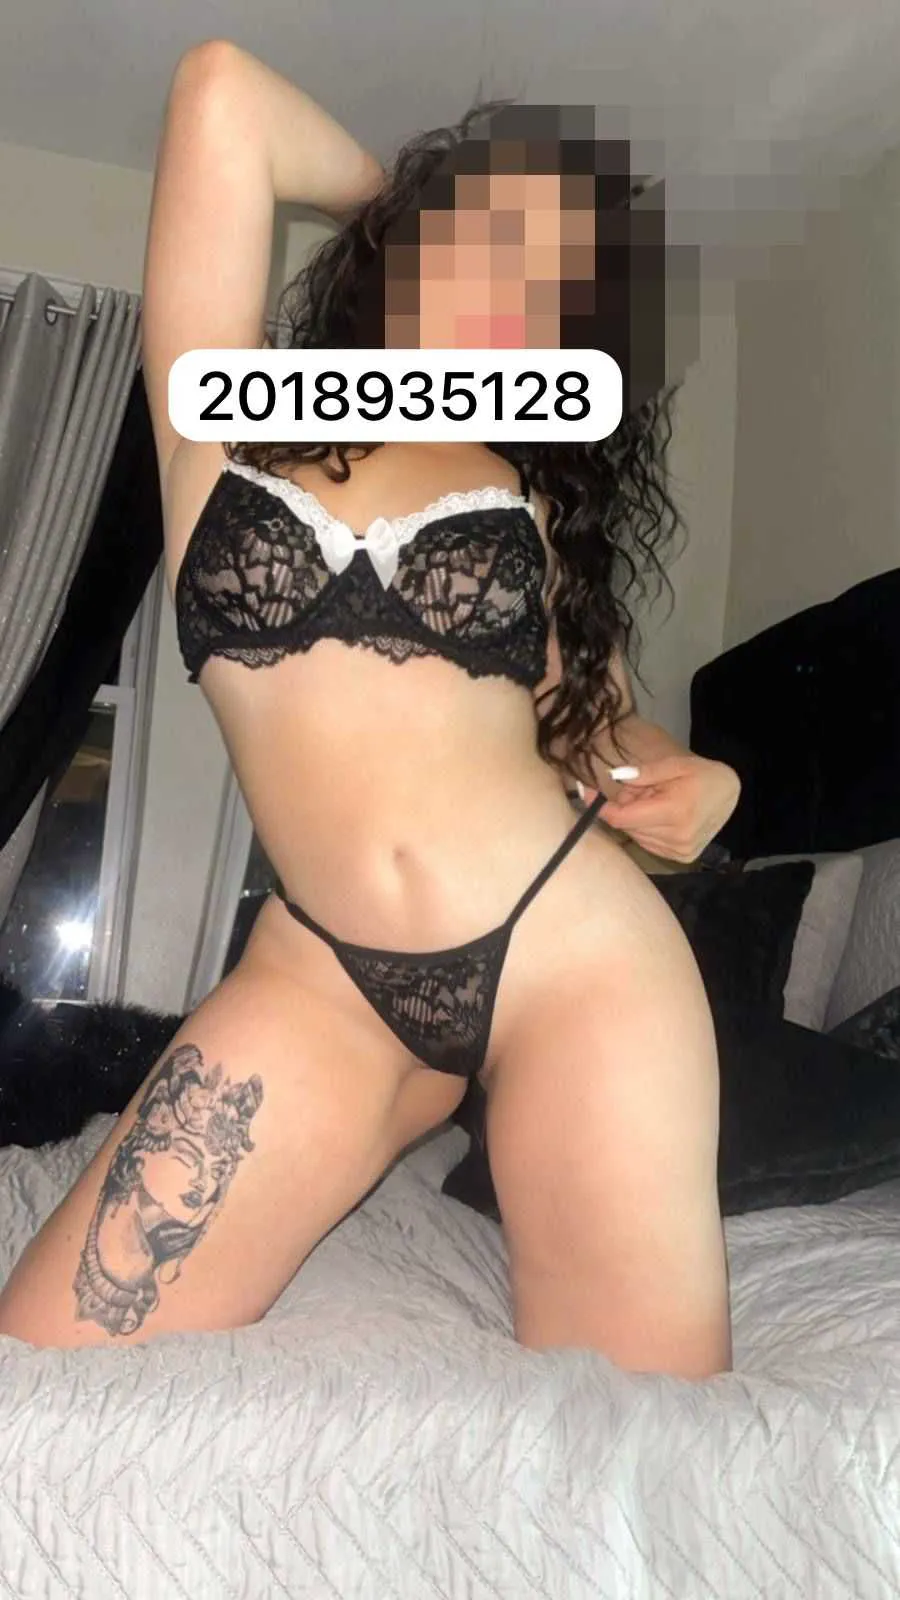 Reviews about escort with phone number 2018935128